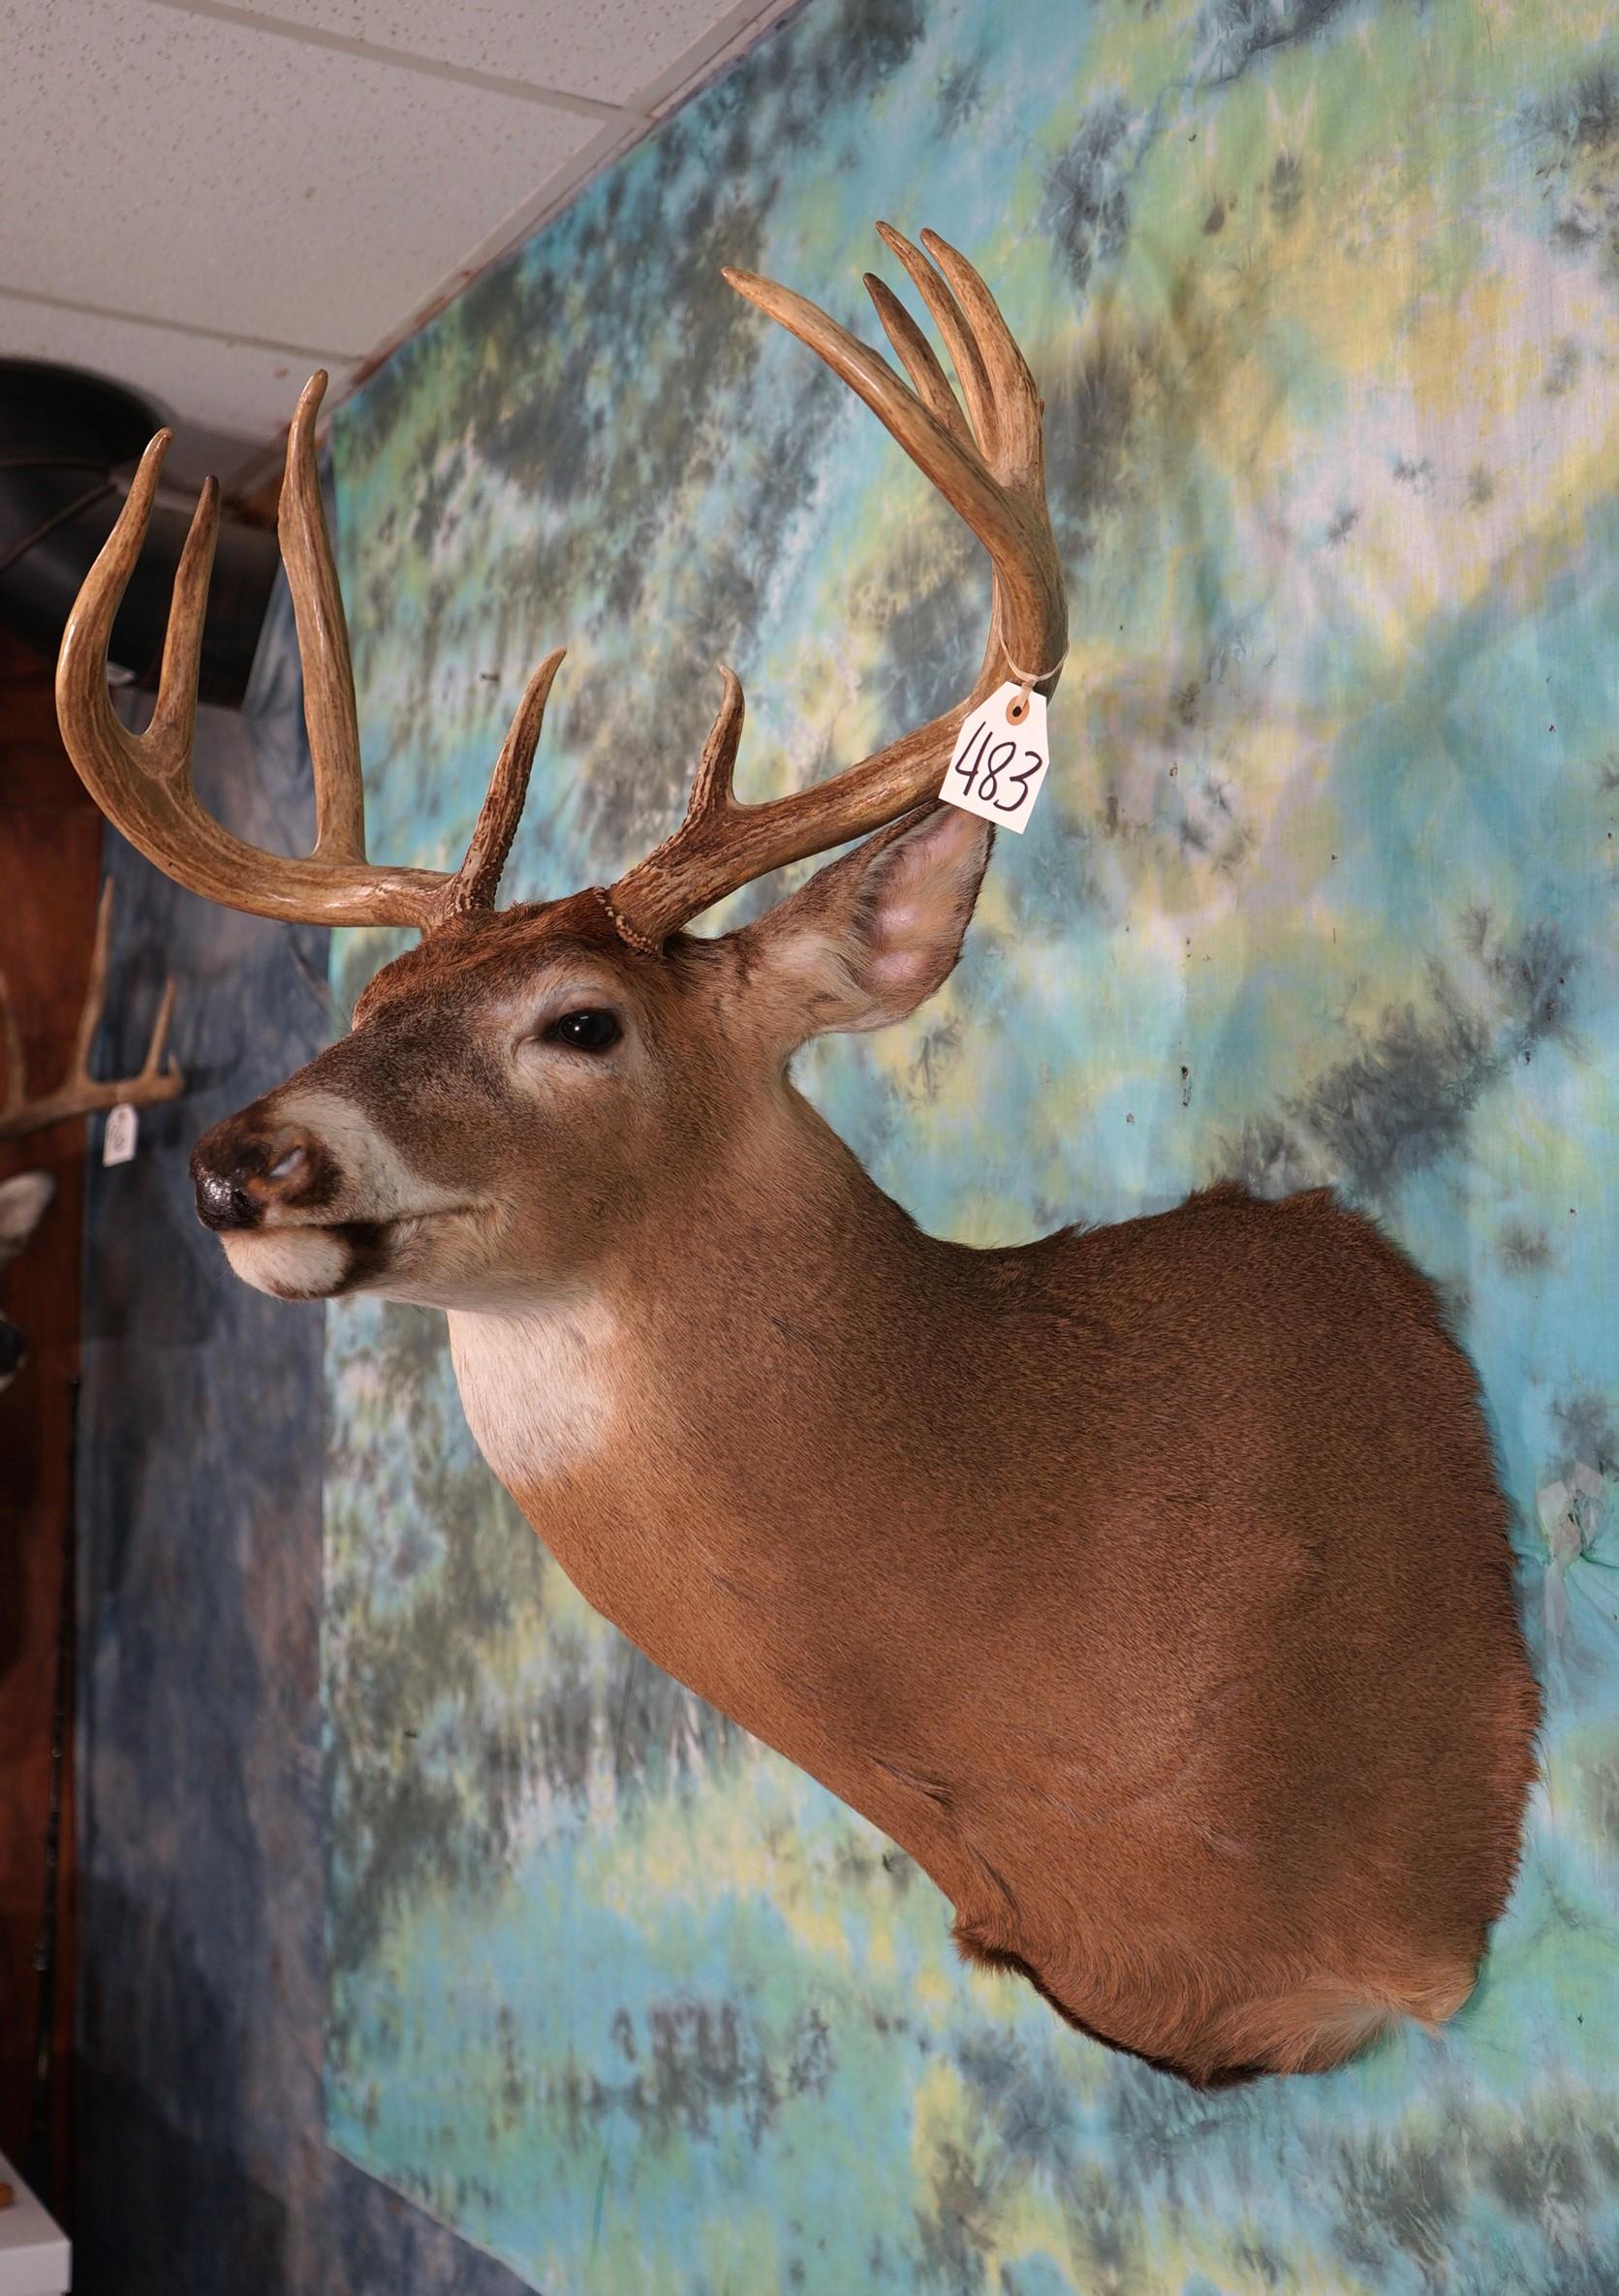 10pt. Illinois Whitetail Deer Shoulder Taxidermy Mount